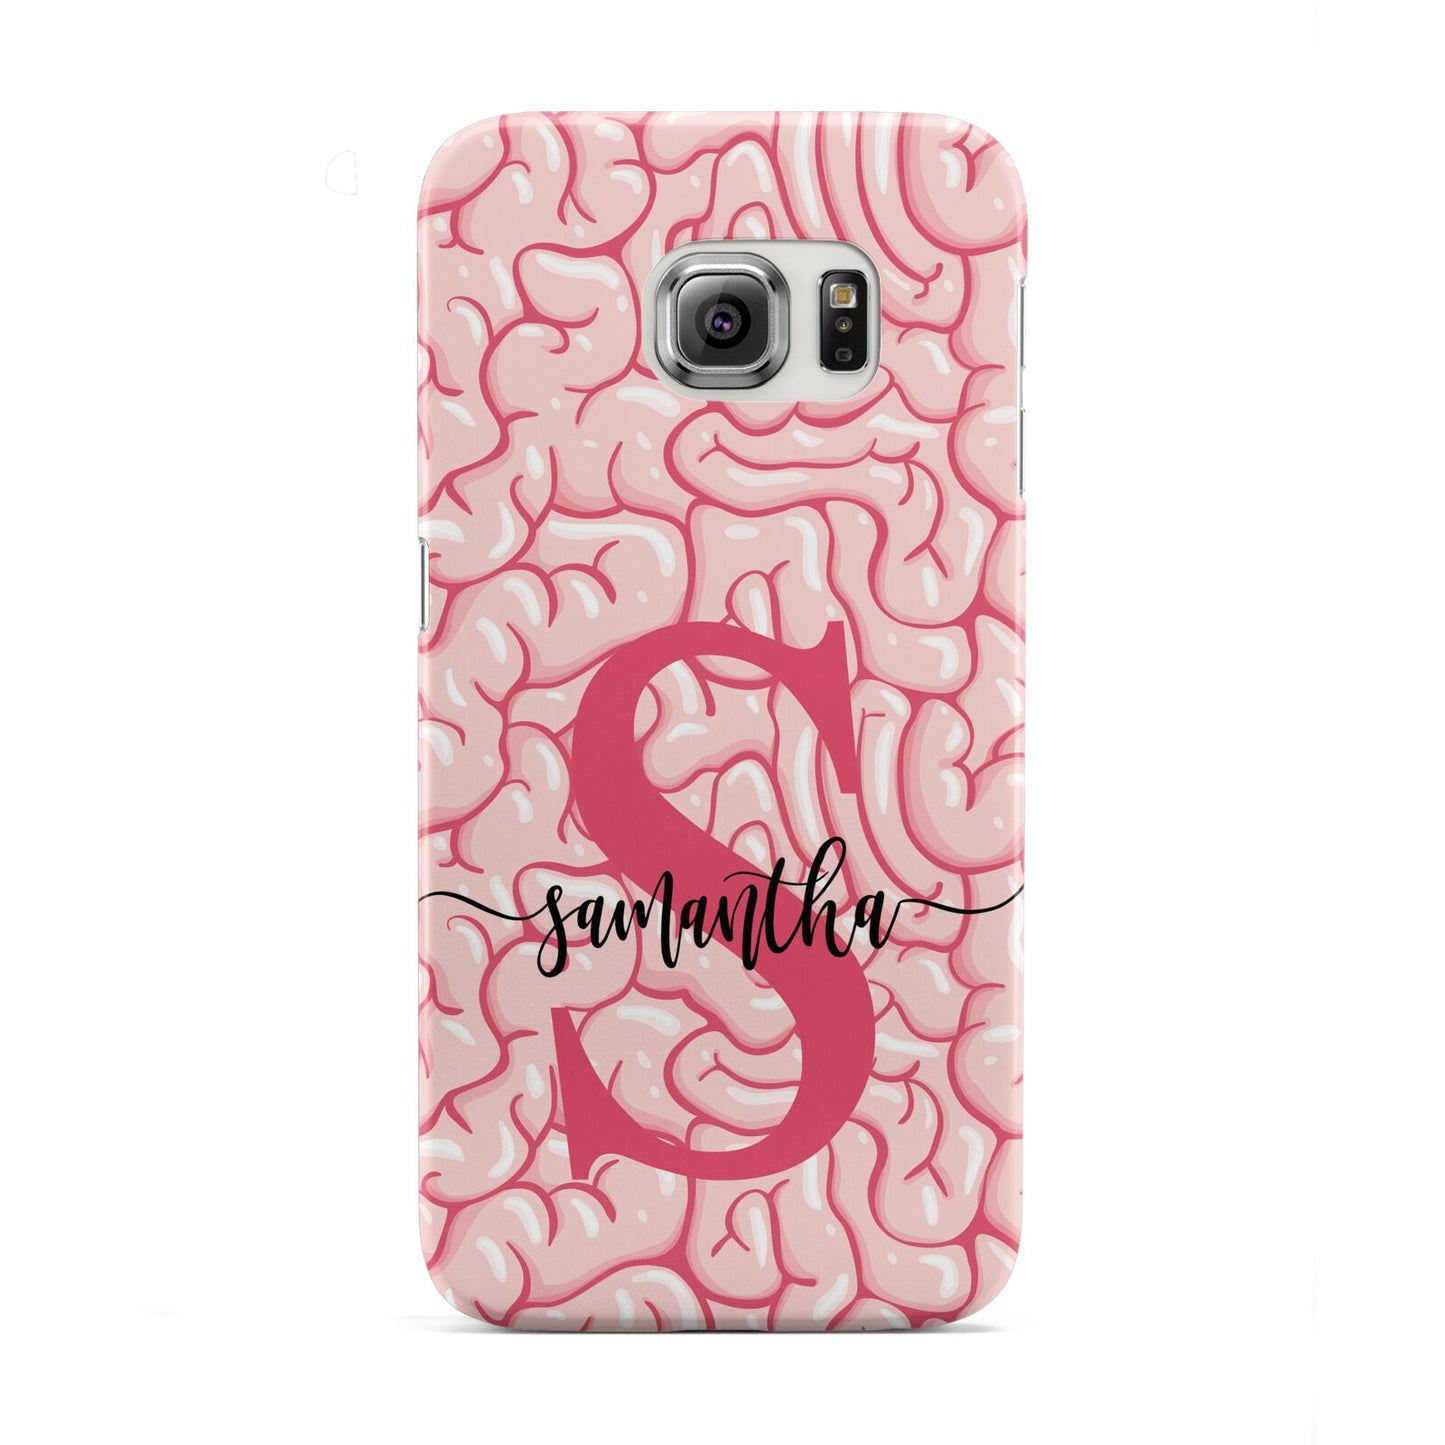 Brain Background with Monogram and Text Samsung Galaxy S6 Edge Case